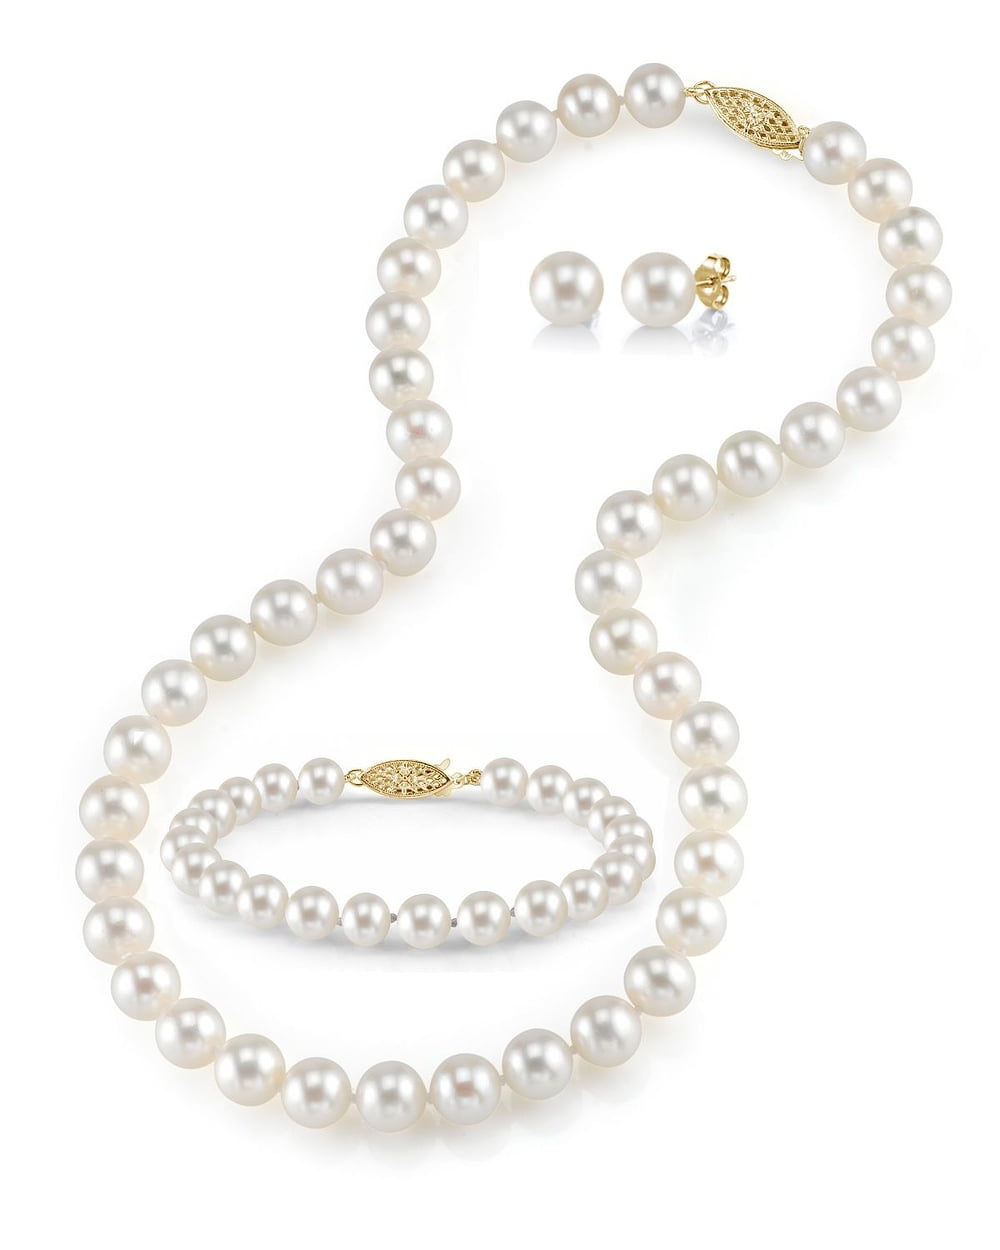 483a Goldtone Bridal Prom 2 Strand Faux Cream Pearl Necklace & Earrings Set 